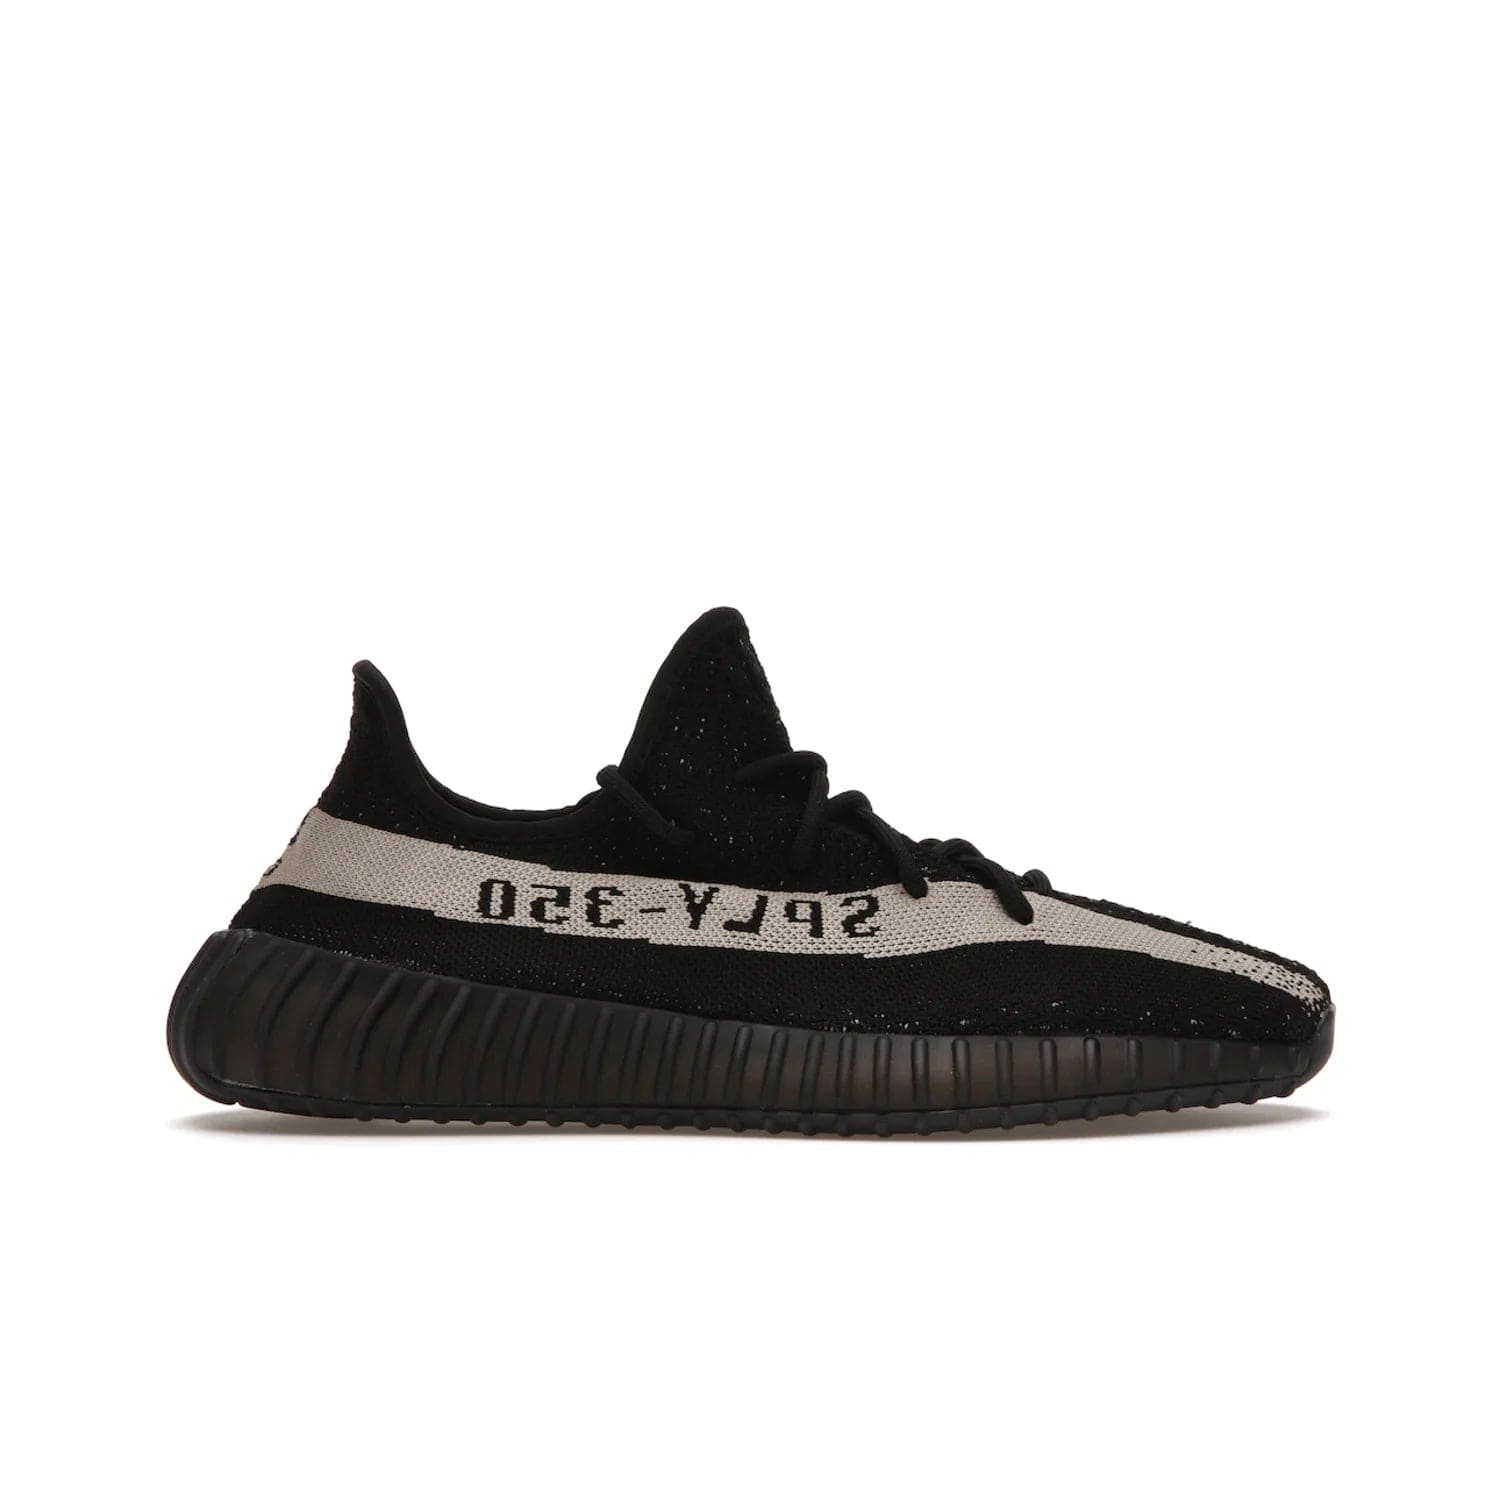 adidas Yeezy Boost 350 V2 Core Black White (2016/2022) - Image 1 - Only at www.BallersClubKickz.com - Stylish adidas Yeezy Boost 350 V2 in classic black with white "SPLY-350" stitched to the side stripe. Features Primeknit upper & Boost sole for comfort. Restock in March 2022.